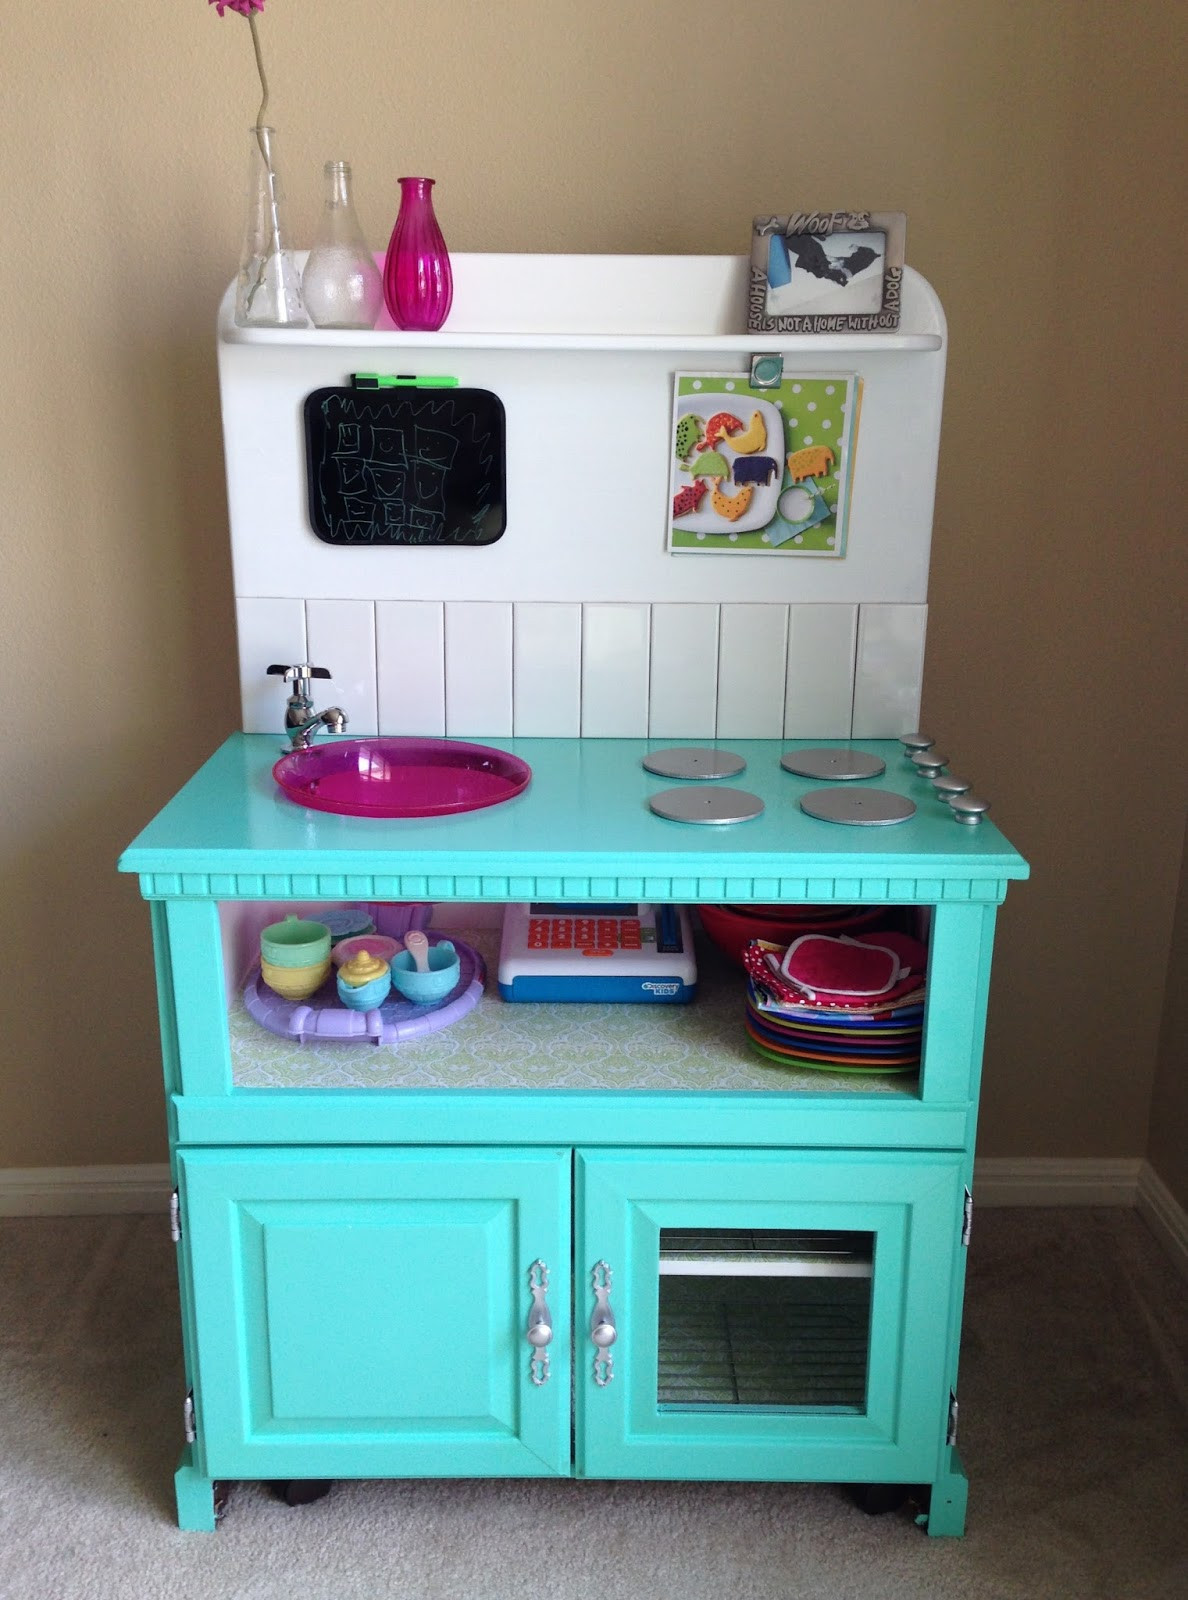 The 20 Best Ideas for Diy Kitchens for Kids - Home, Family, Style and Art Ideas